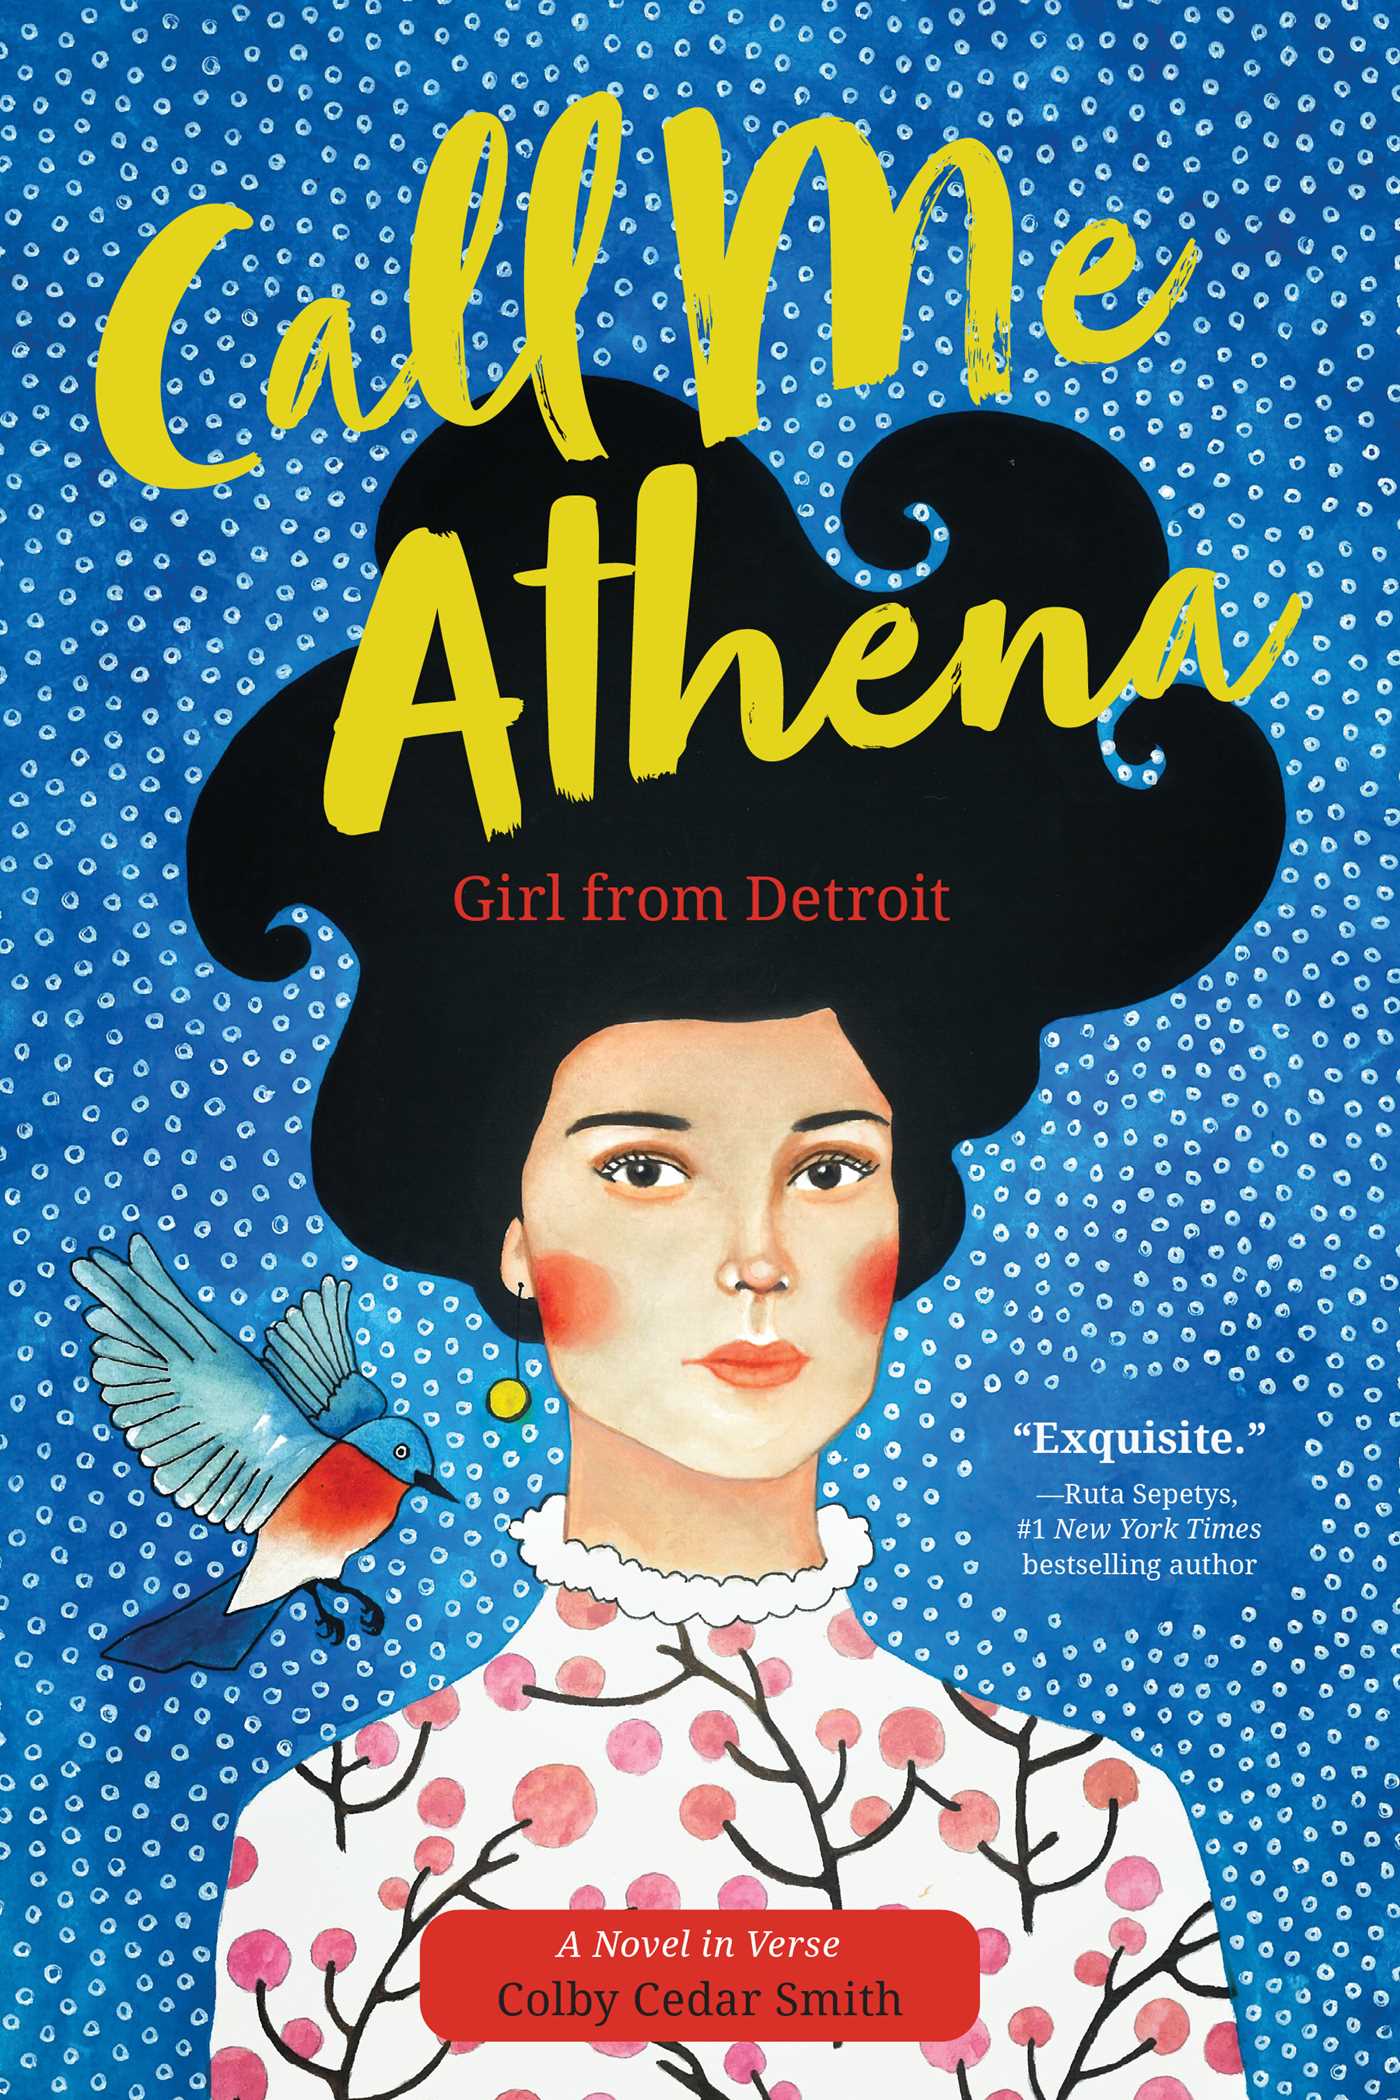 Call me Athena : Girl From Detroit